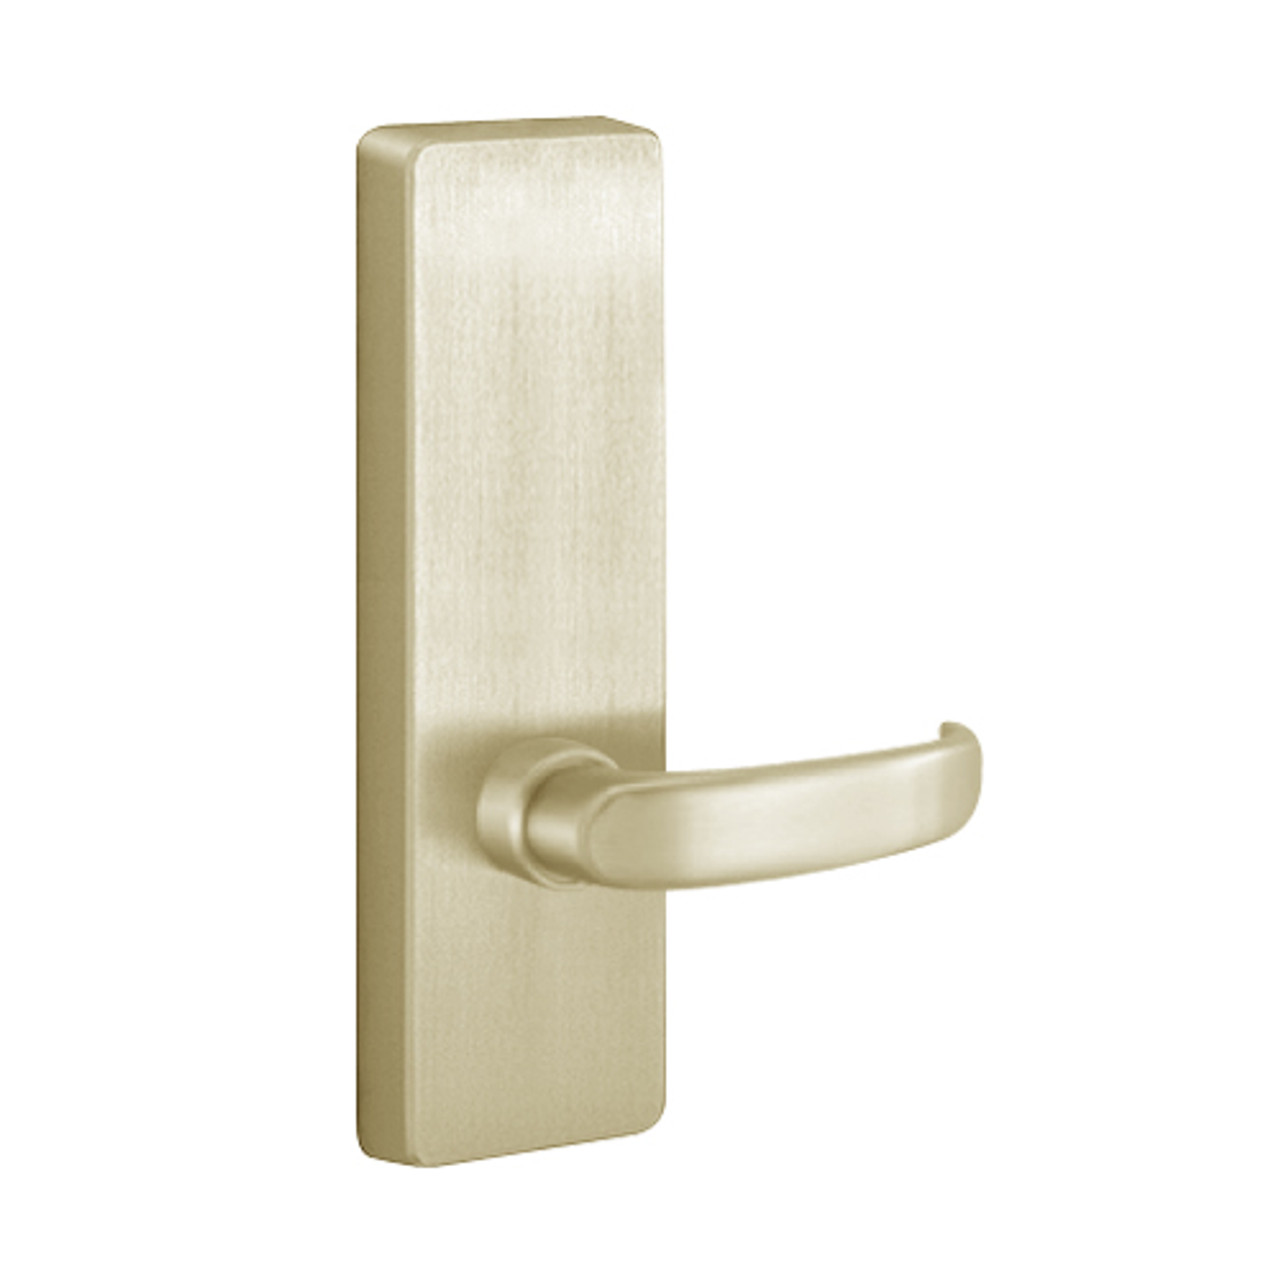 4902D-606-LHR PHI Dummy Trim with D Lever Design for Apex and Olympian Series Exit Device in Satin Brass Finish